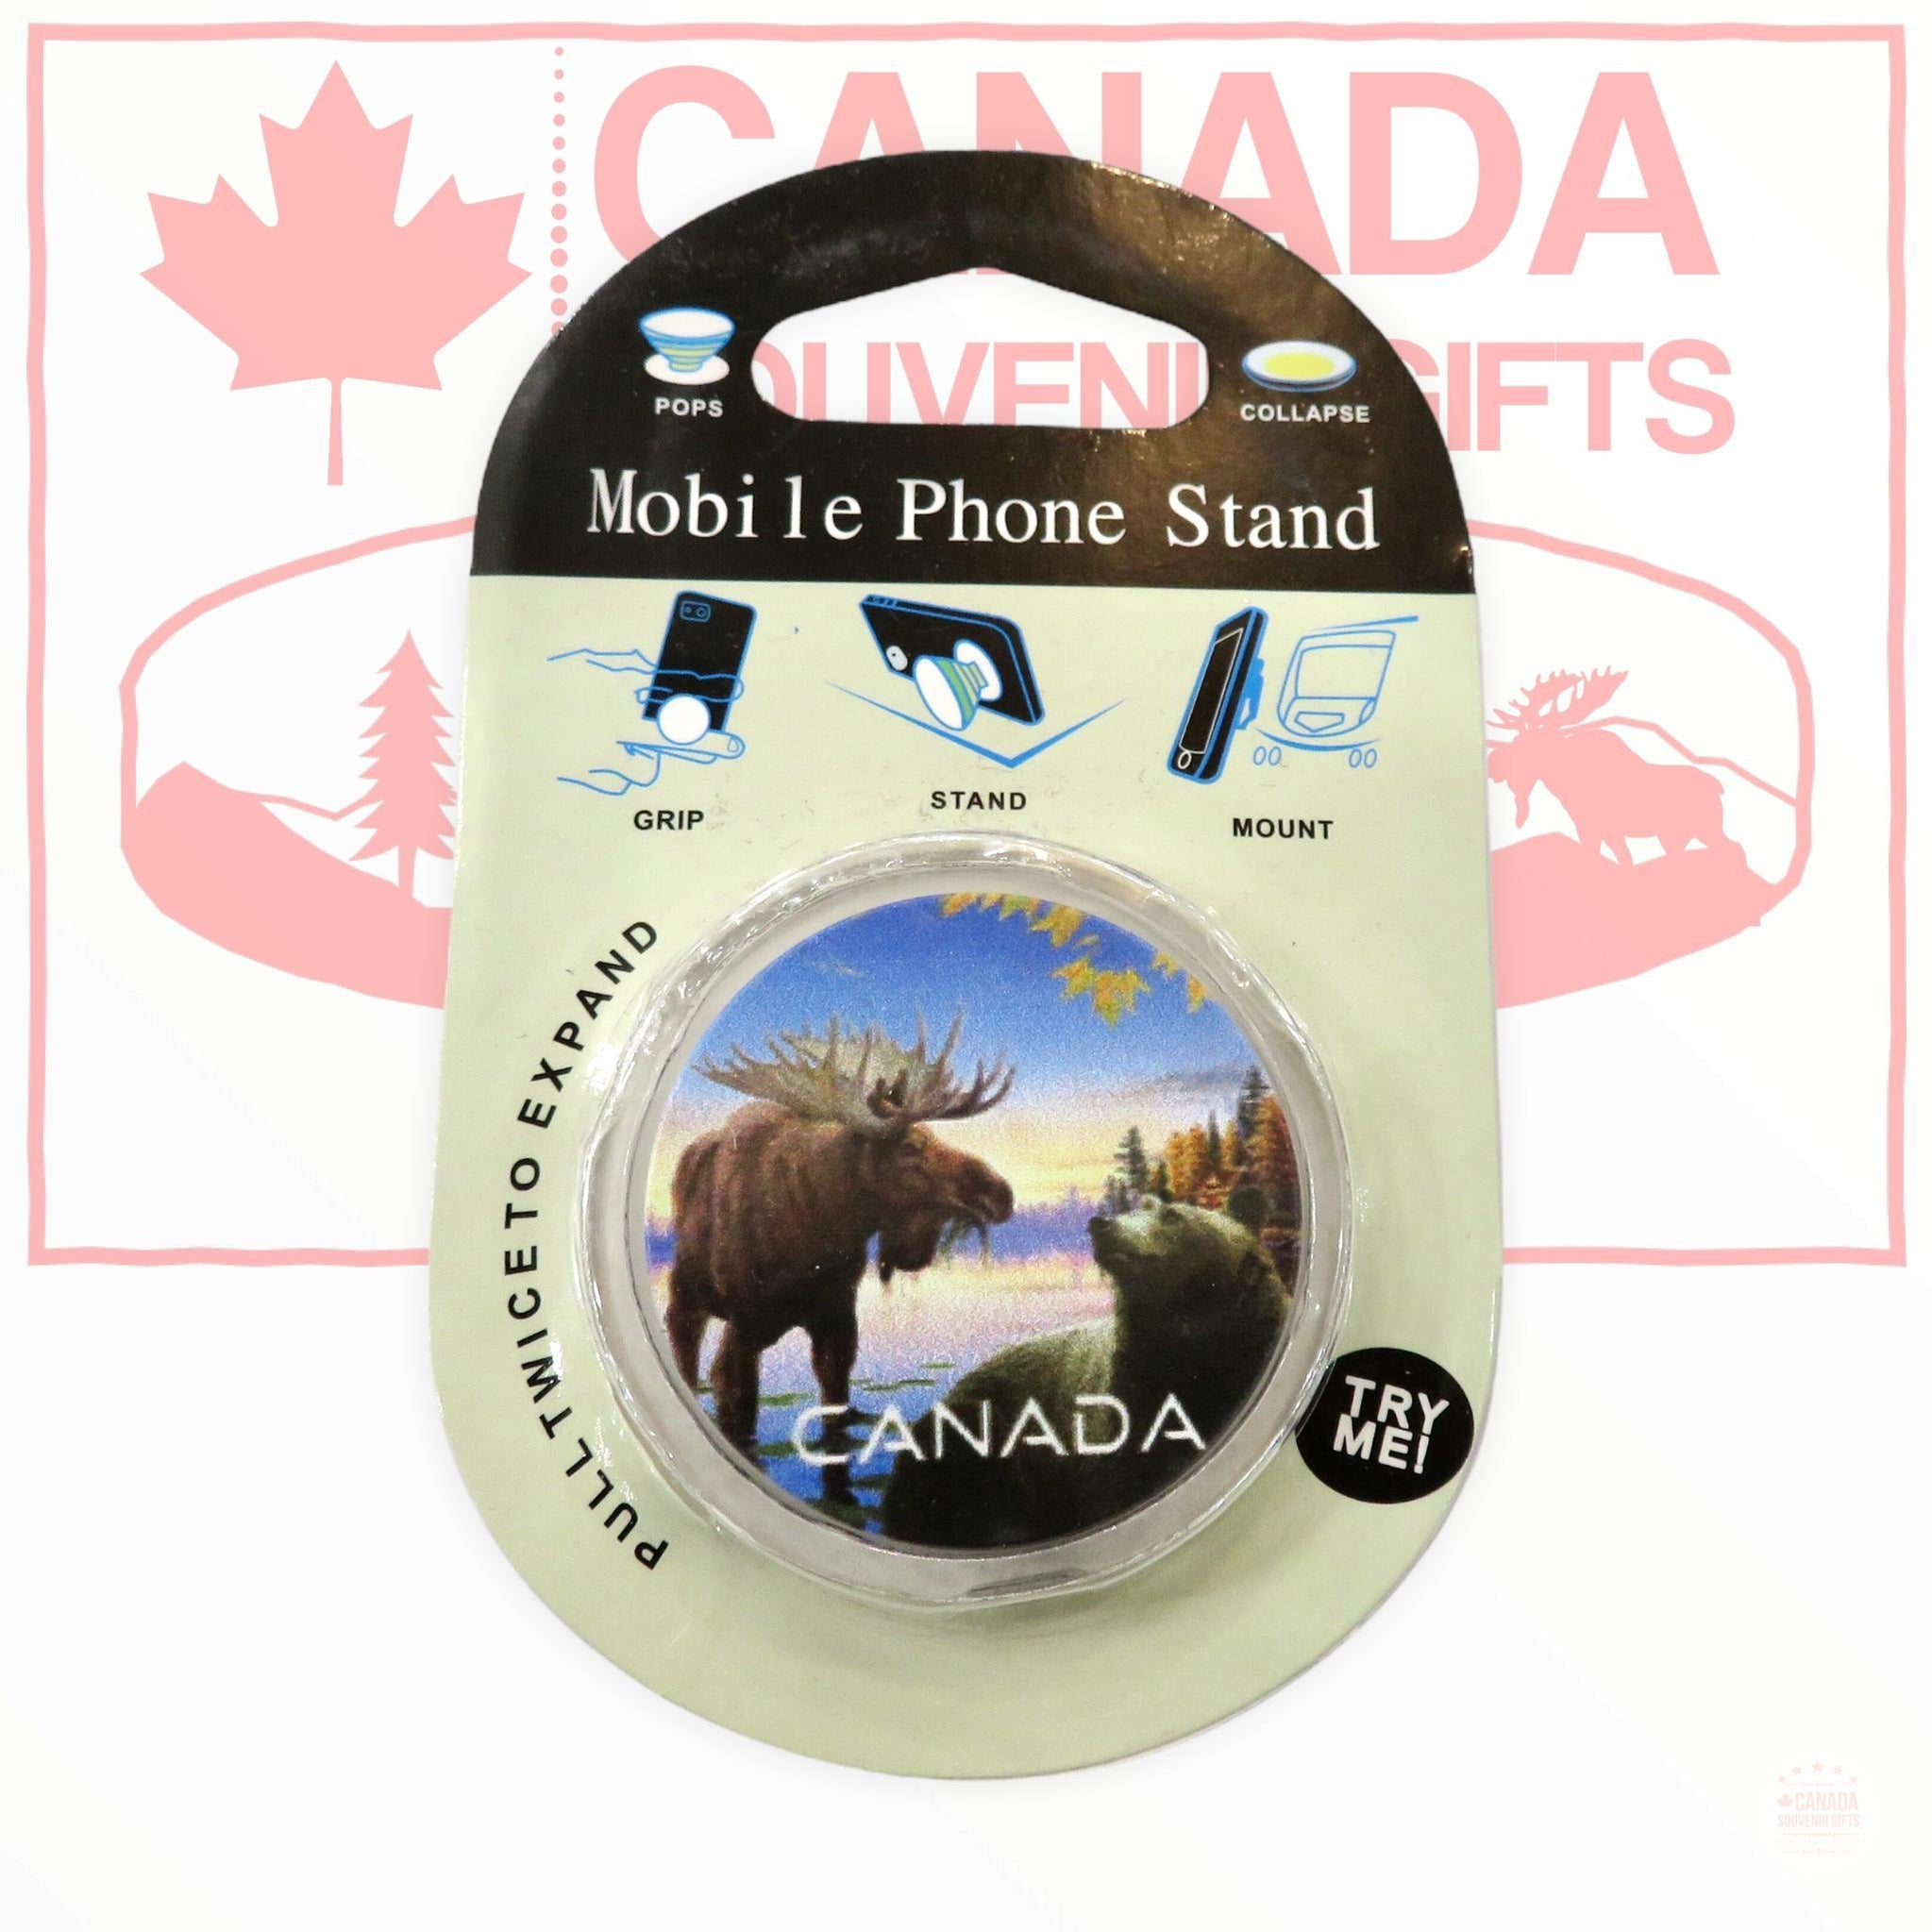 Mobile Phone Stand - Canada Moose and Bear Phone Pop-Grip Stand Mount - Canada Maple Leaf - Montreal Skyline View